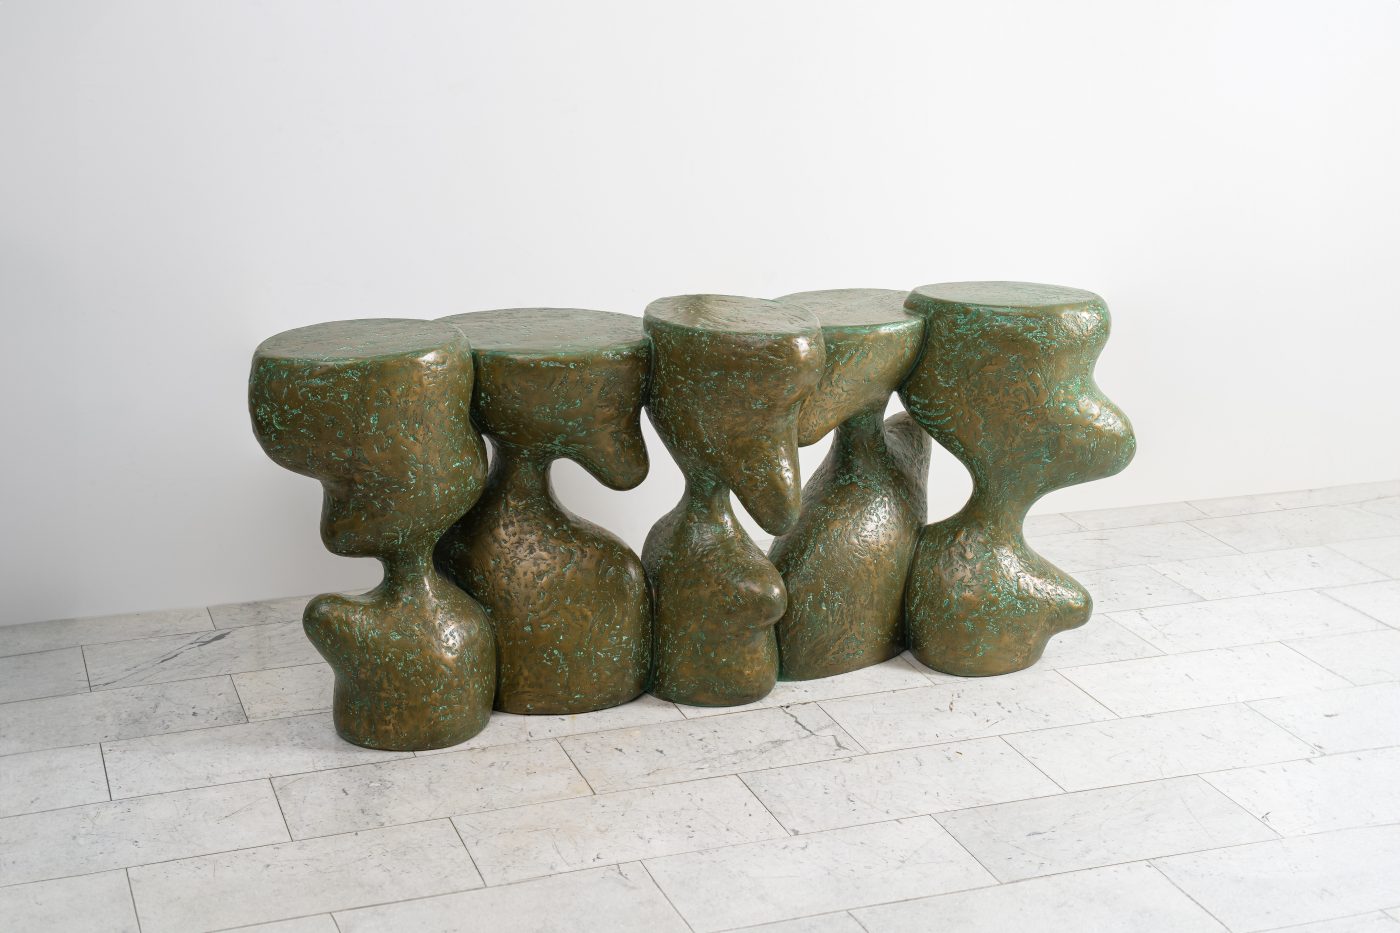 Yunhwan Kim’s metal Unintended console table offered Todd Merrill